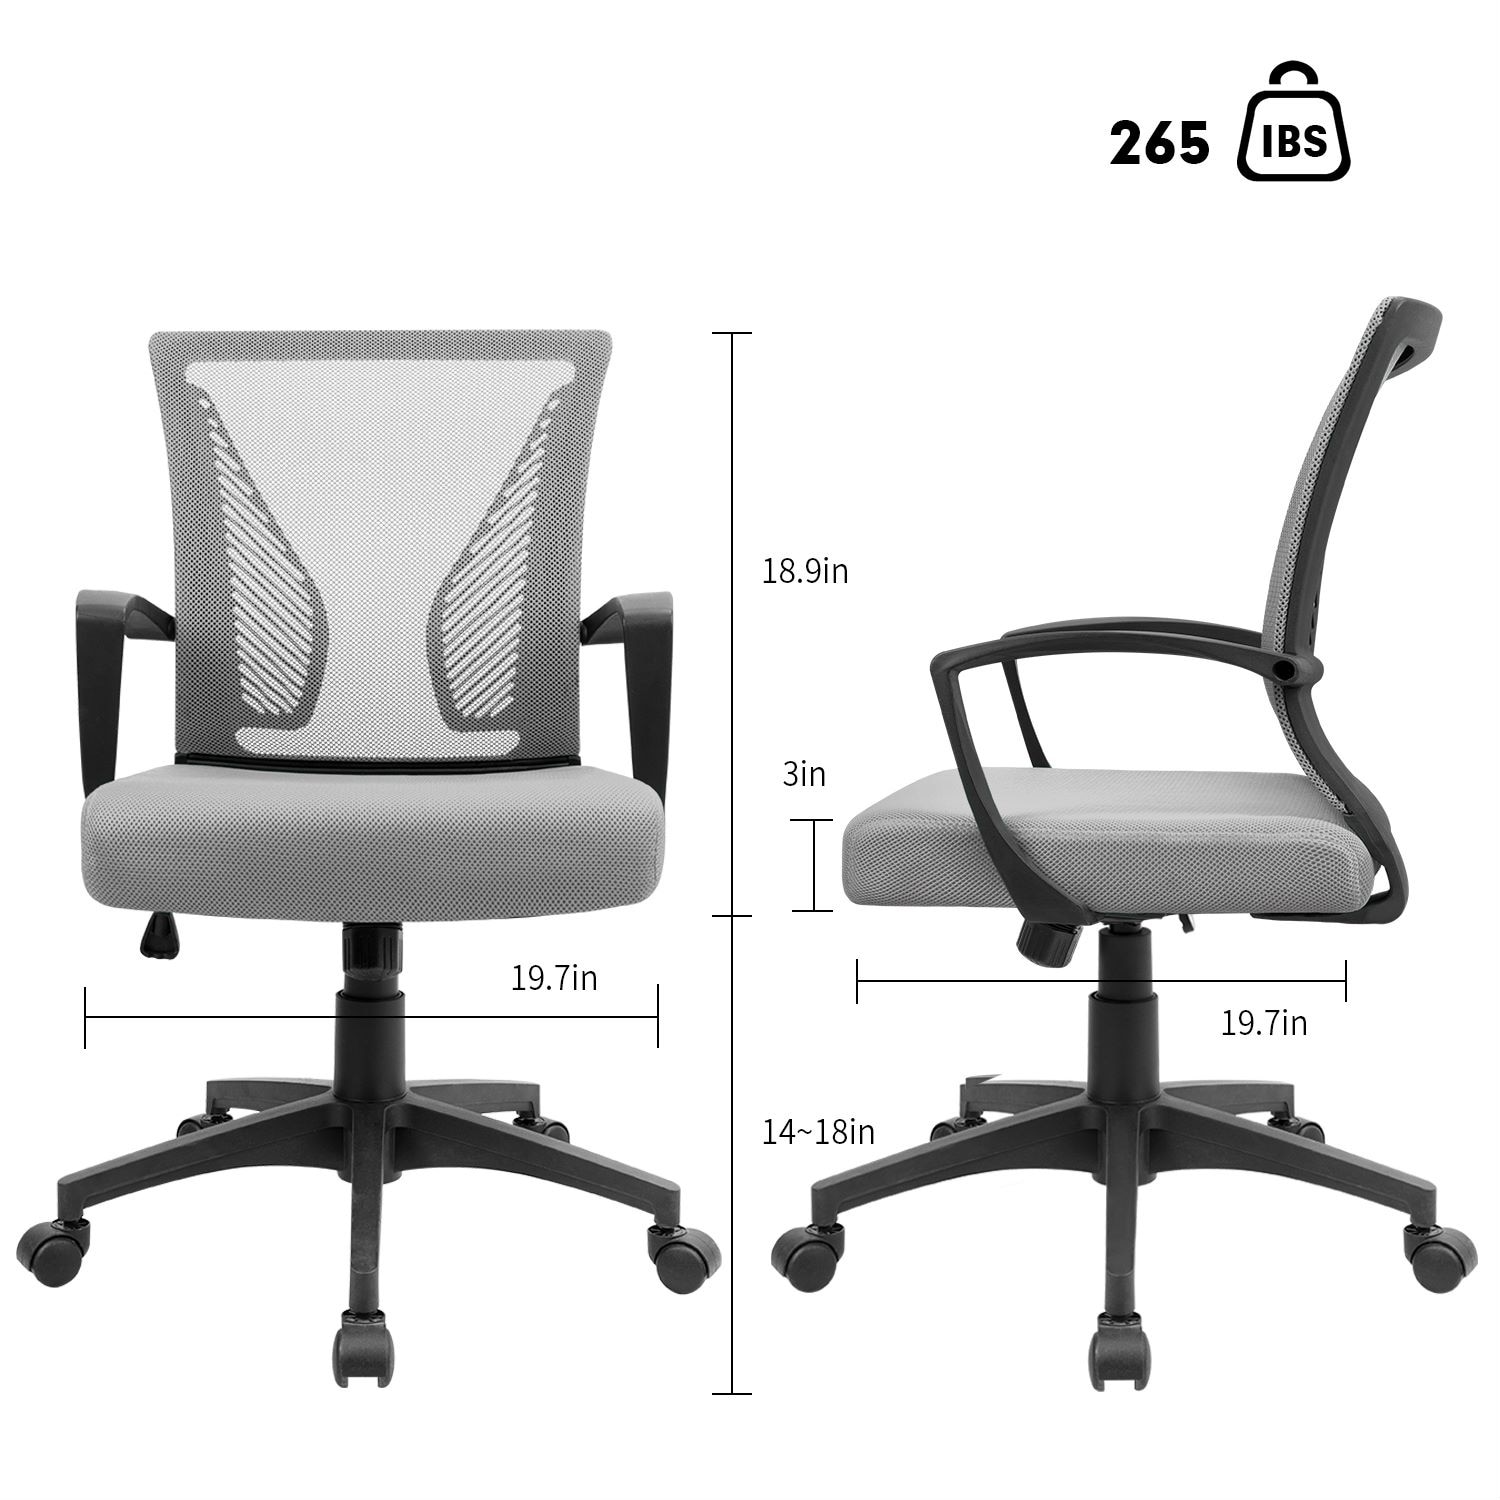 https://ak1.ostkcdn.com/images/products/is/images/direct/279c6b2efa57c43d52a2d328fbdb1978ee033420/Office-Chair-Mid-Back-Swivel-Lumbar-Support-Desk-Chair%2C-Computer-Ergonomic-Mesh-Chair-with-Armrest.jpg